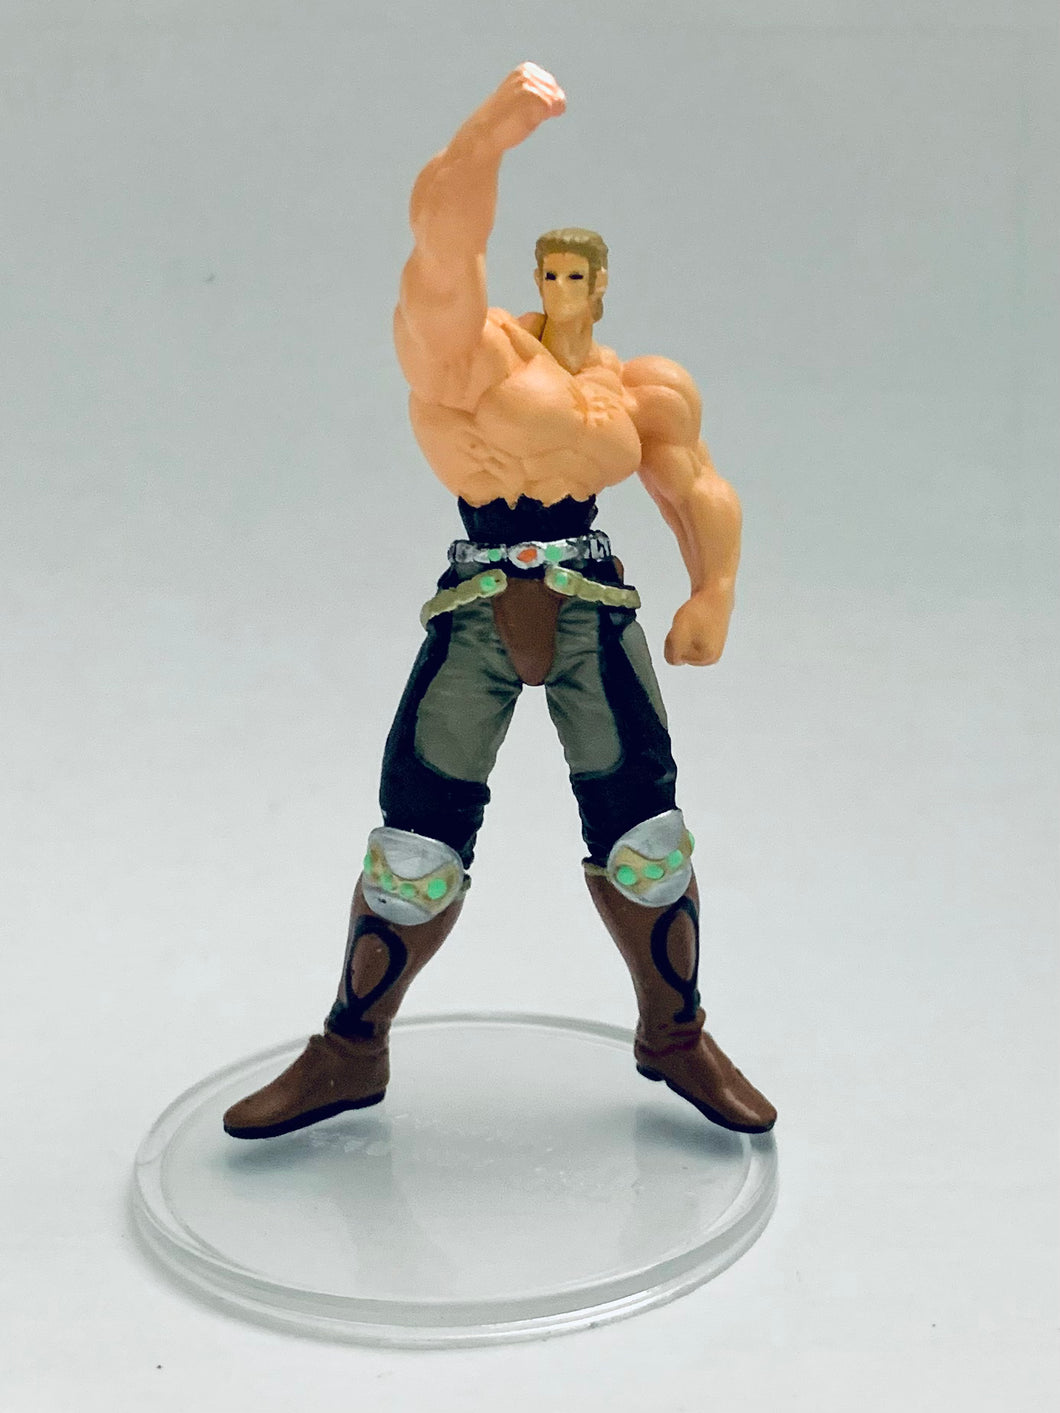 Hokuto no Ken - Raoh - Fist of the North Star All-Star Retsuden Capsule Figure Collection Part 4 - Advent! End of the Century Conqueror